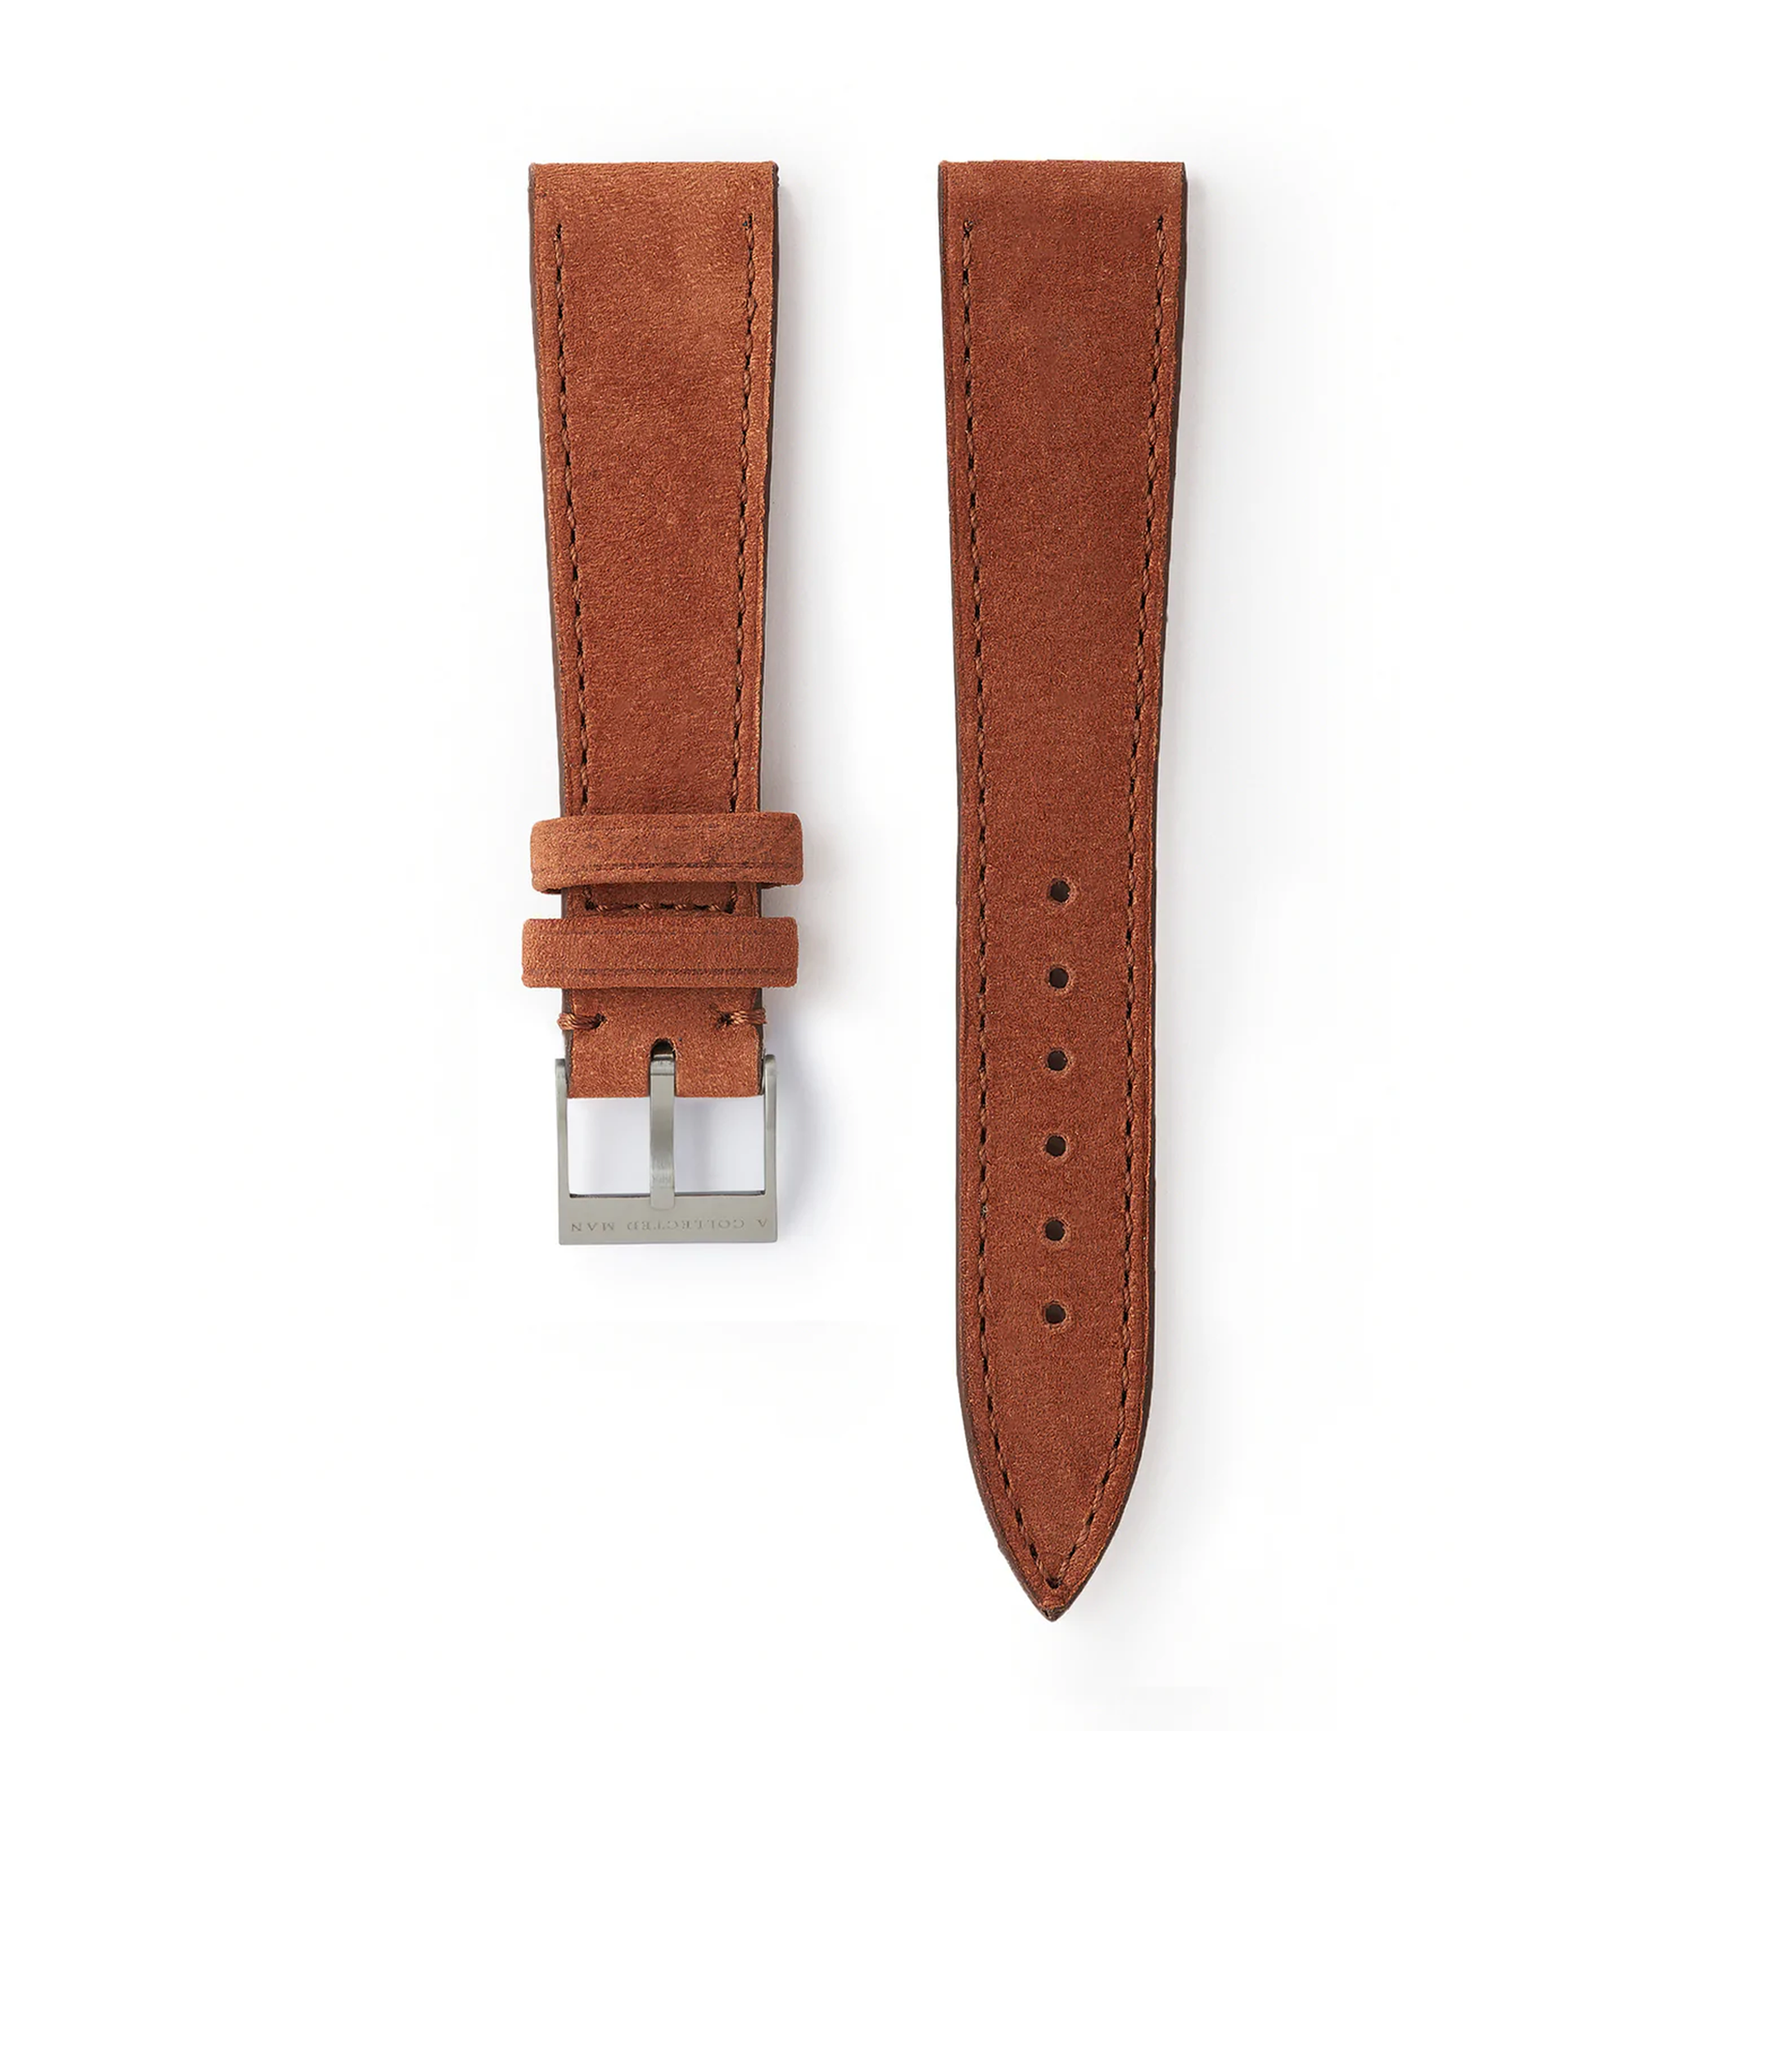 Buy nubuck quality watch strap in golden spice brown from A Collected Man London, in short or regular lengths. We are proud to offer these hand-crafted watch straps, thoughtfully made in Europe, to suit your watch. Available to order online for worldwide delivery.